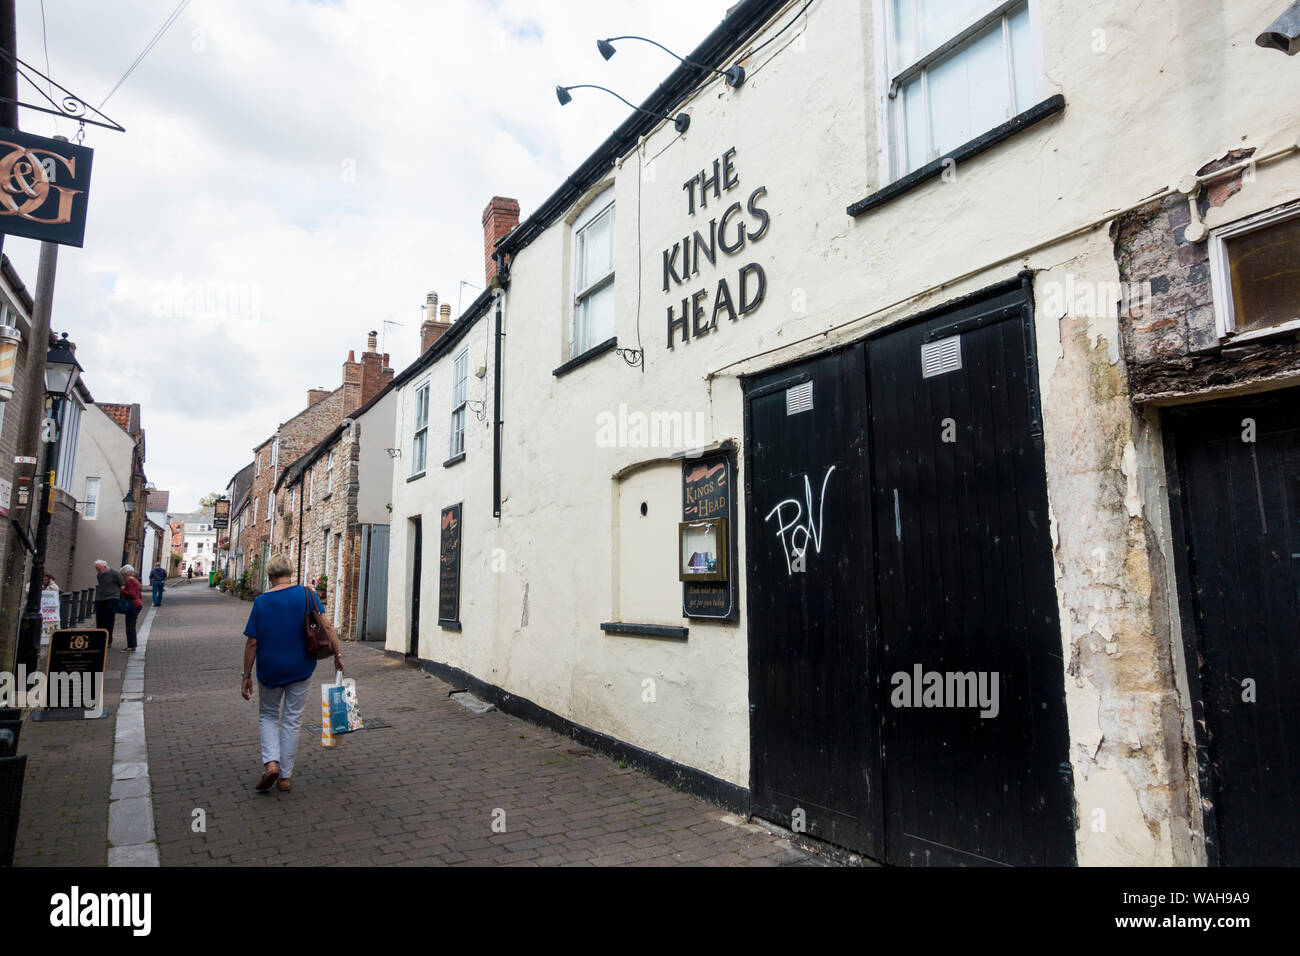 The Kings Head public house due for renovation, Wells, Somerset, England, UK. Stock Photo